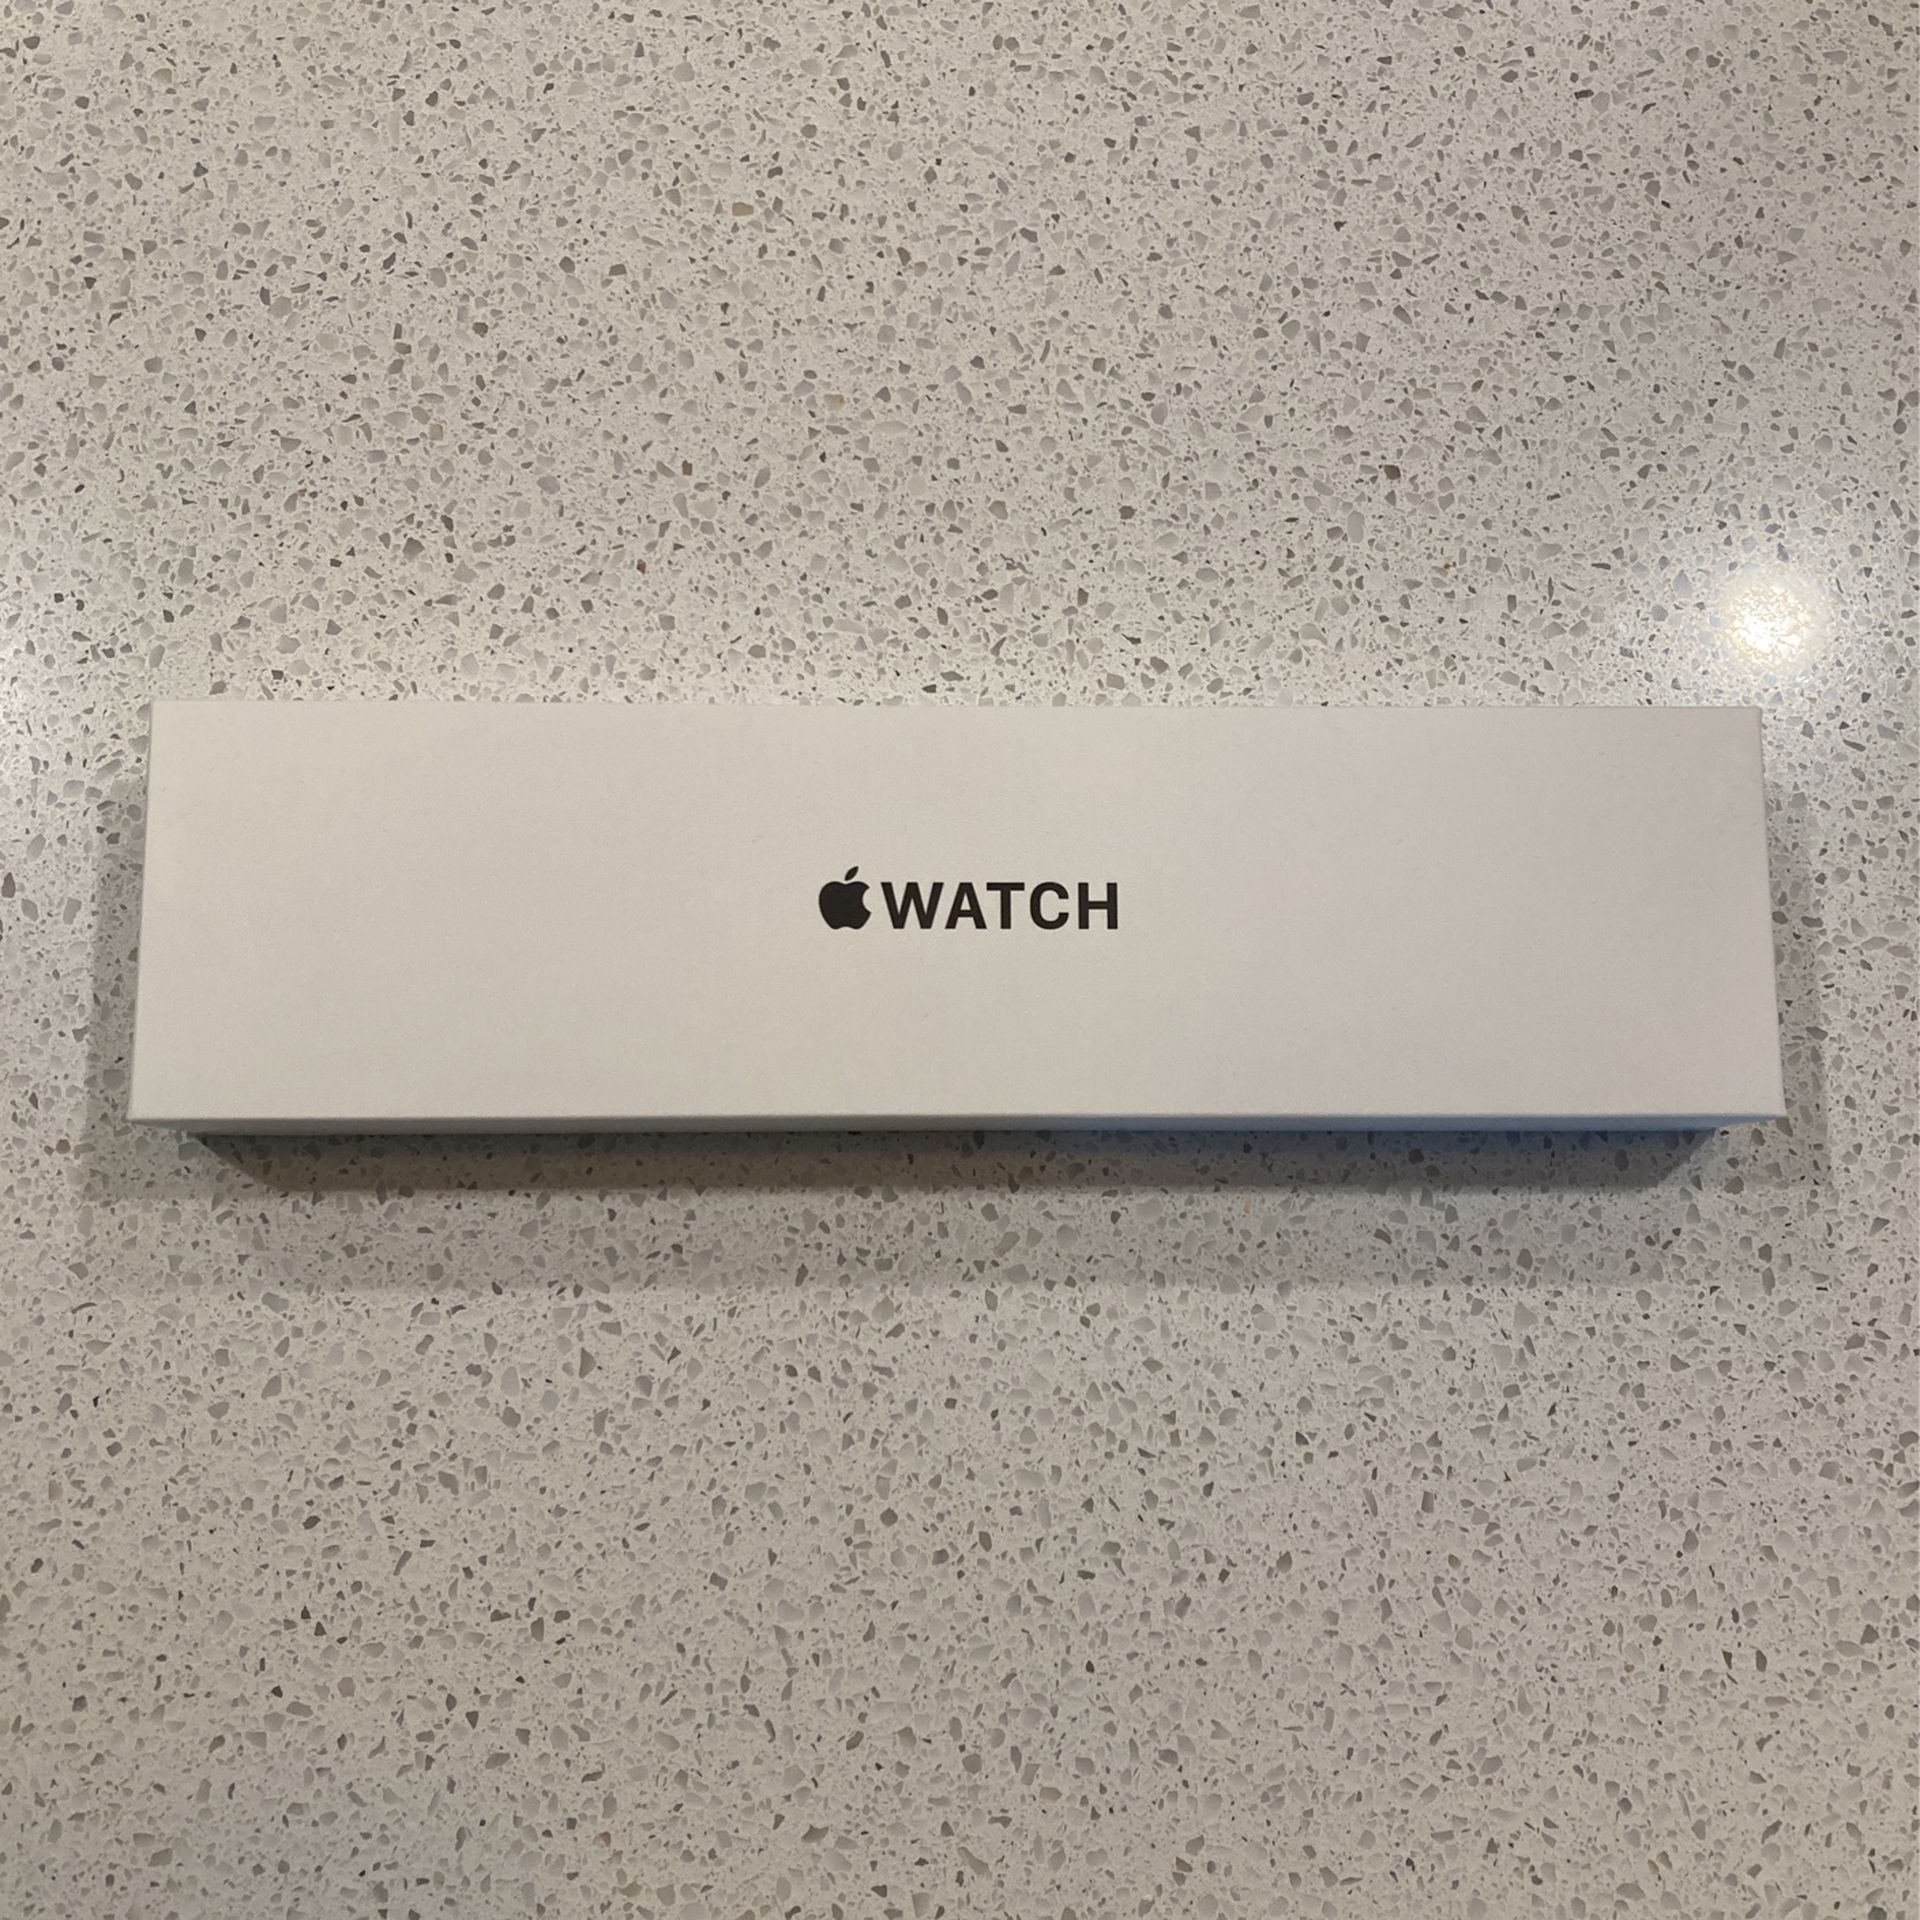 Apple Watch SE (2nd Gen - GPS/Cellular) With Sport Watch Band